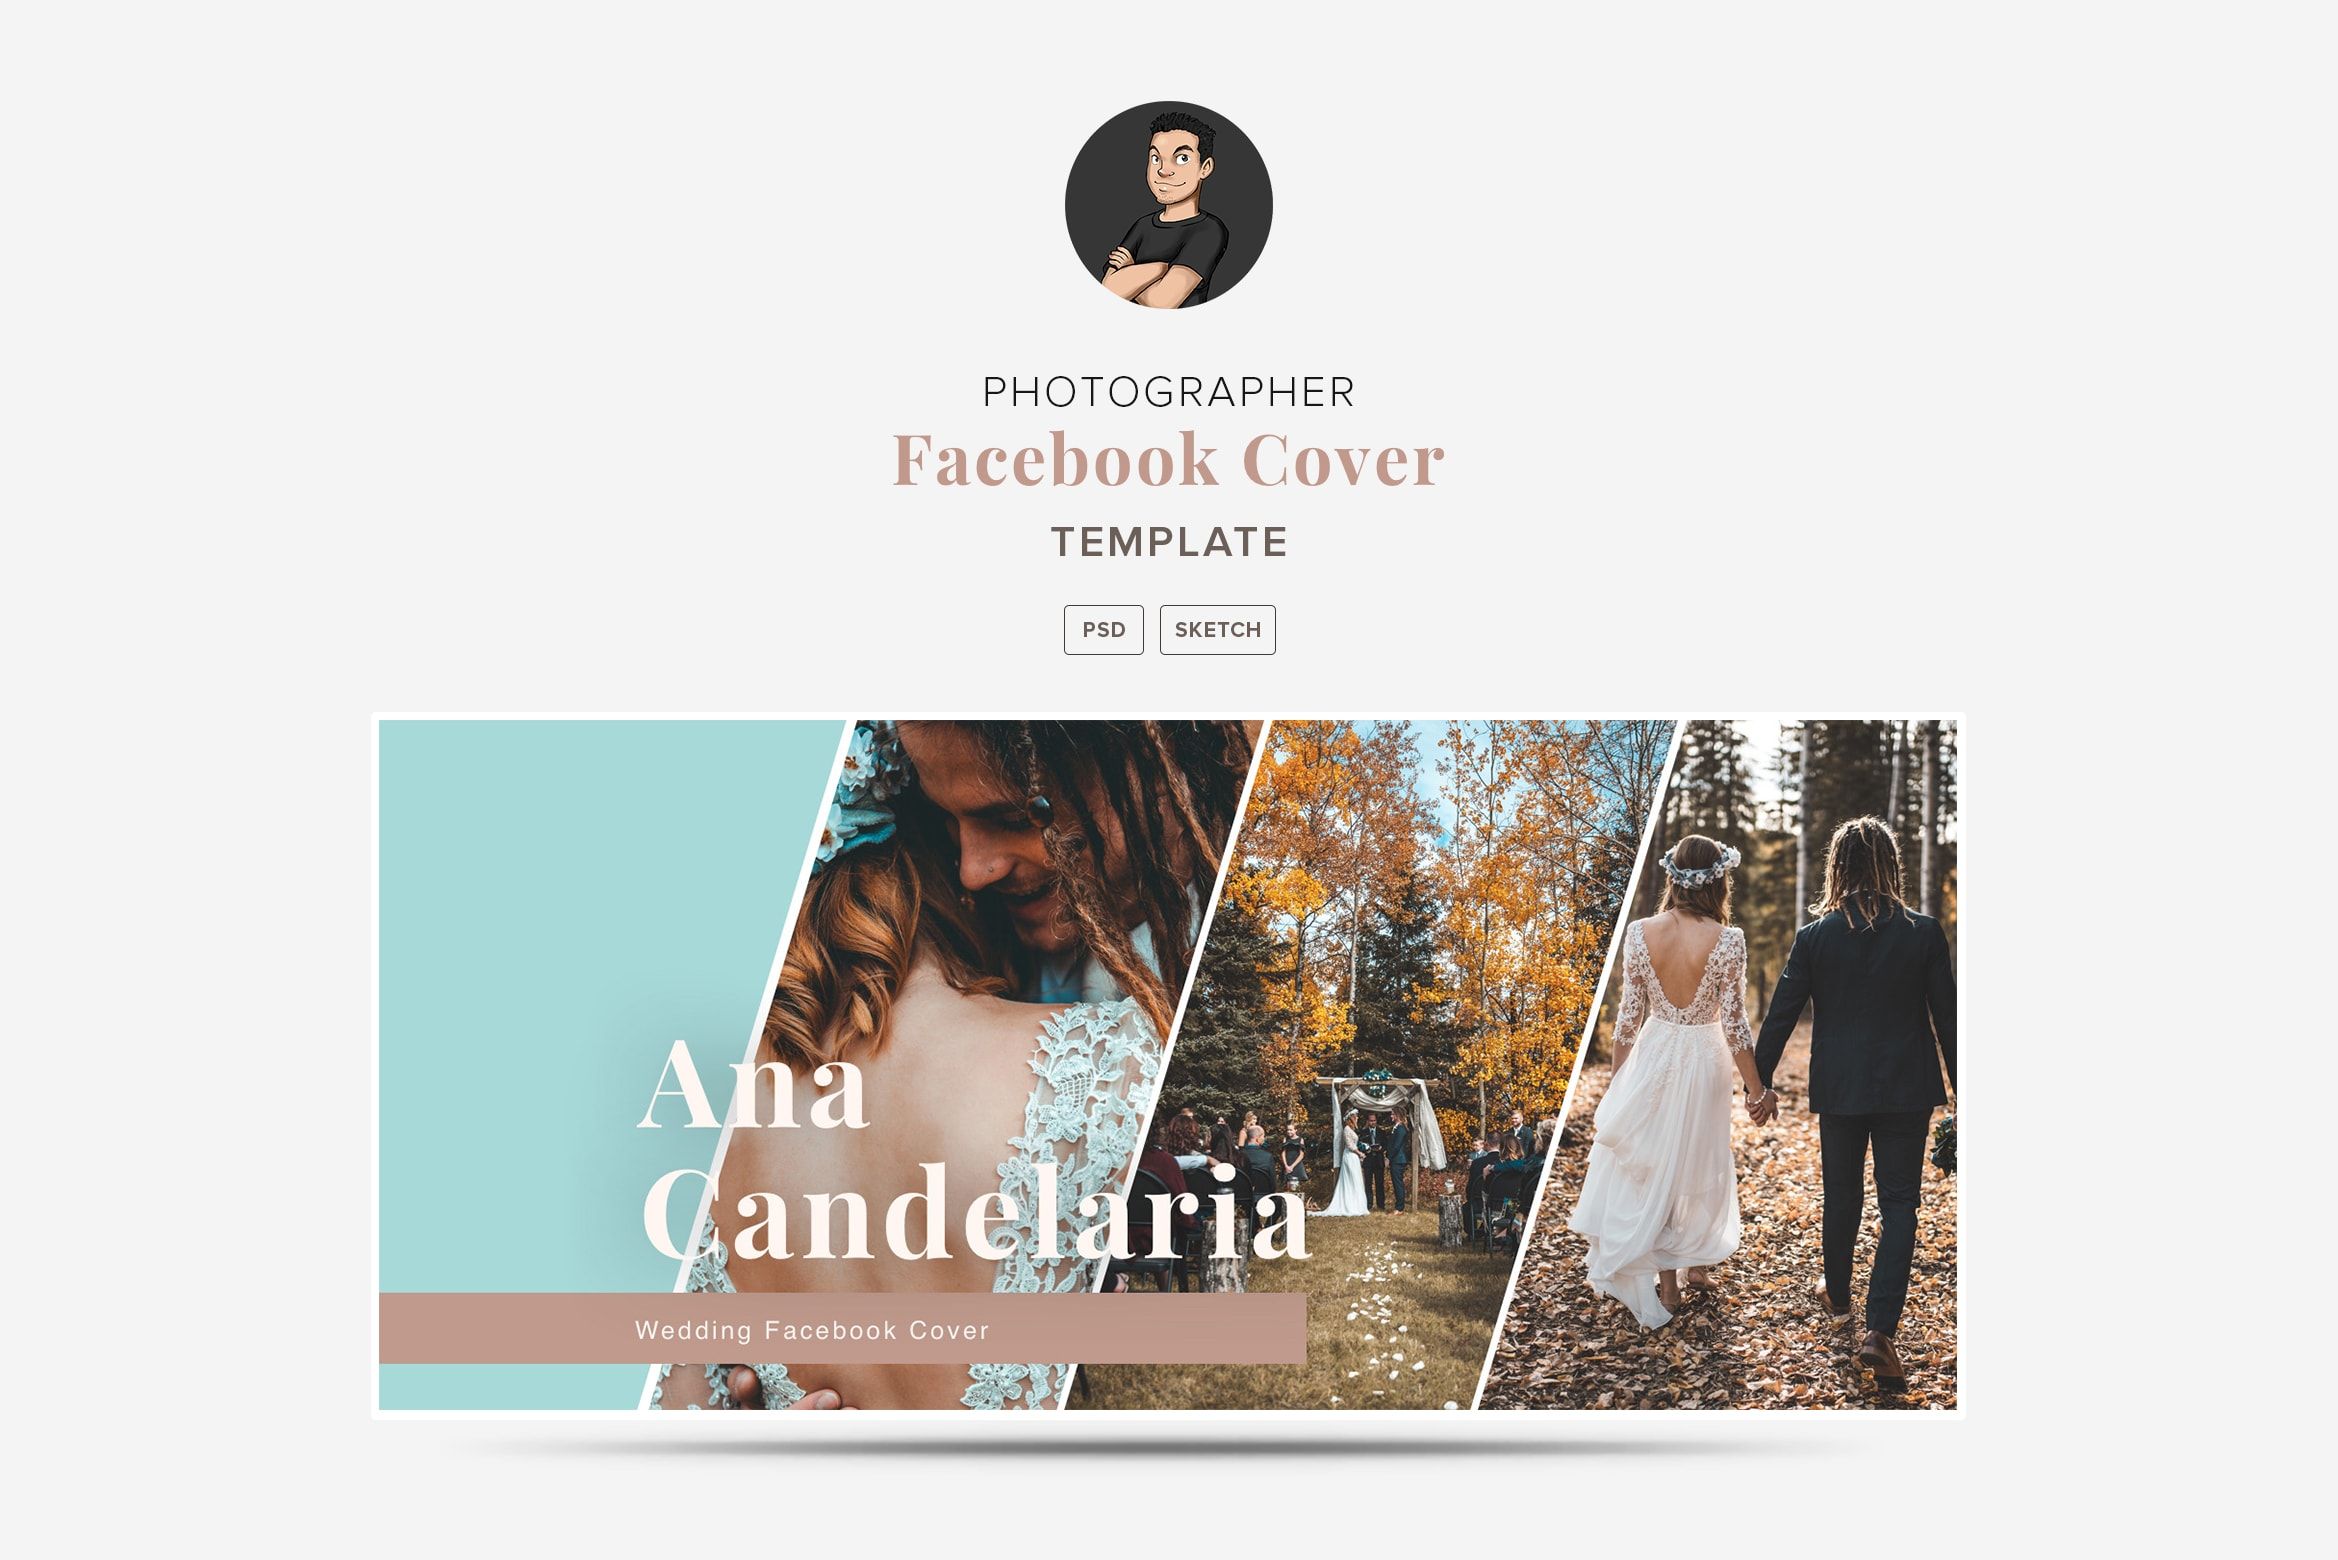 Facebook Cover Templates 01 for Photographers